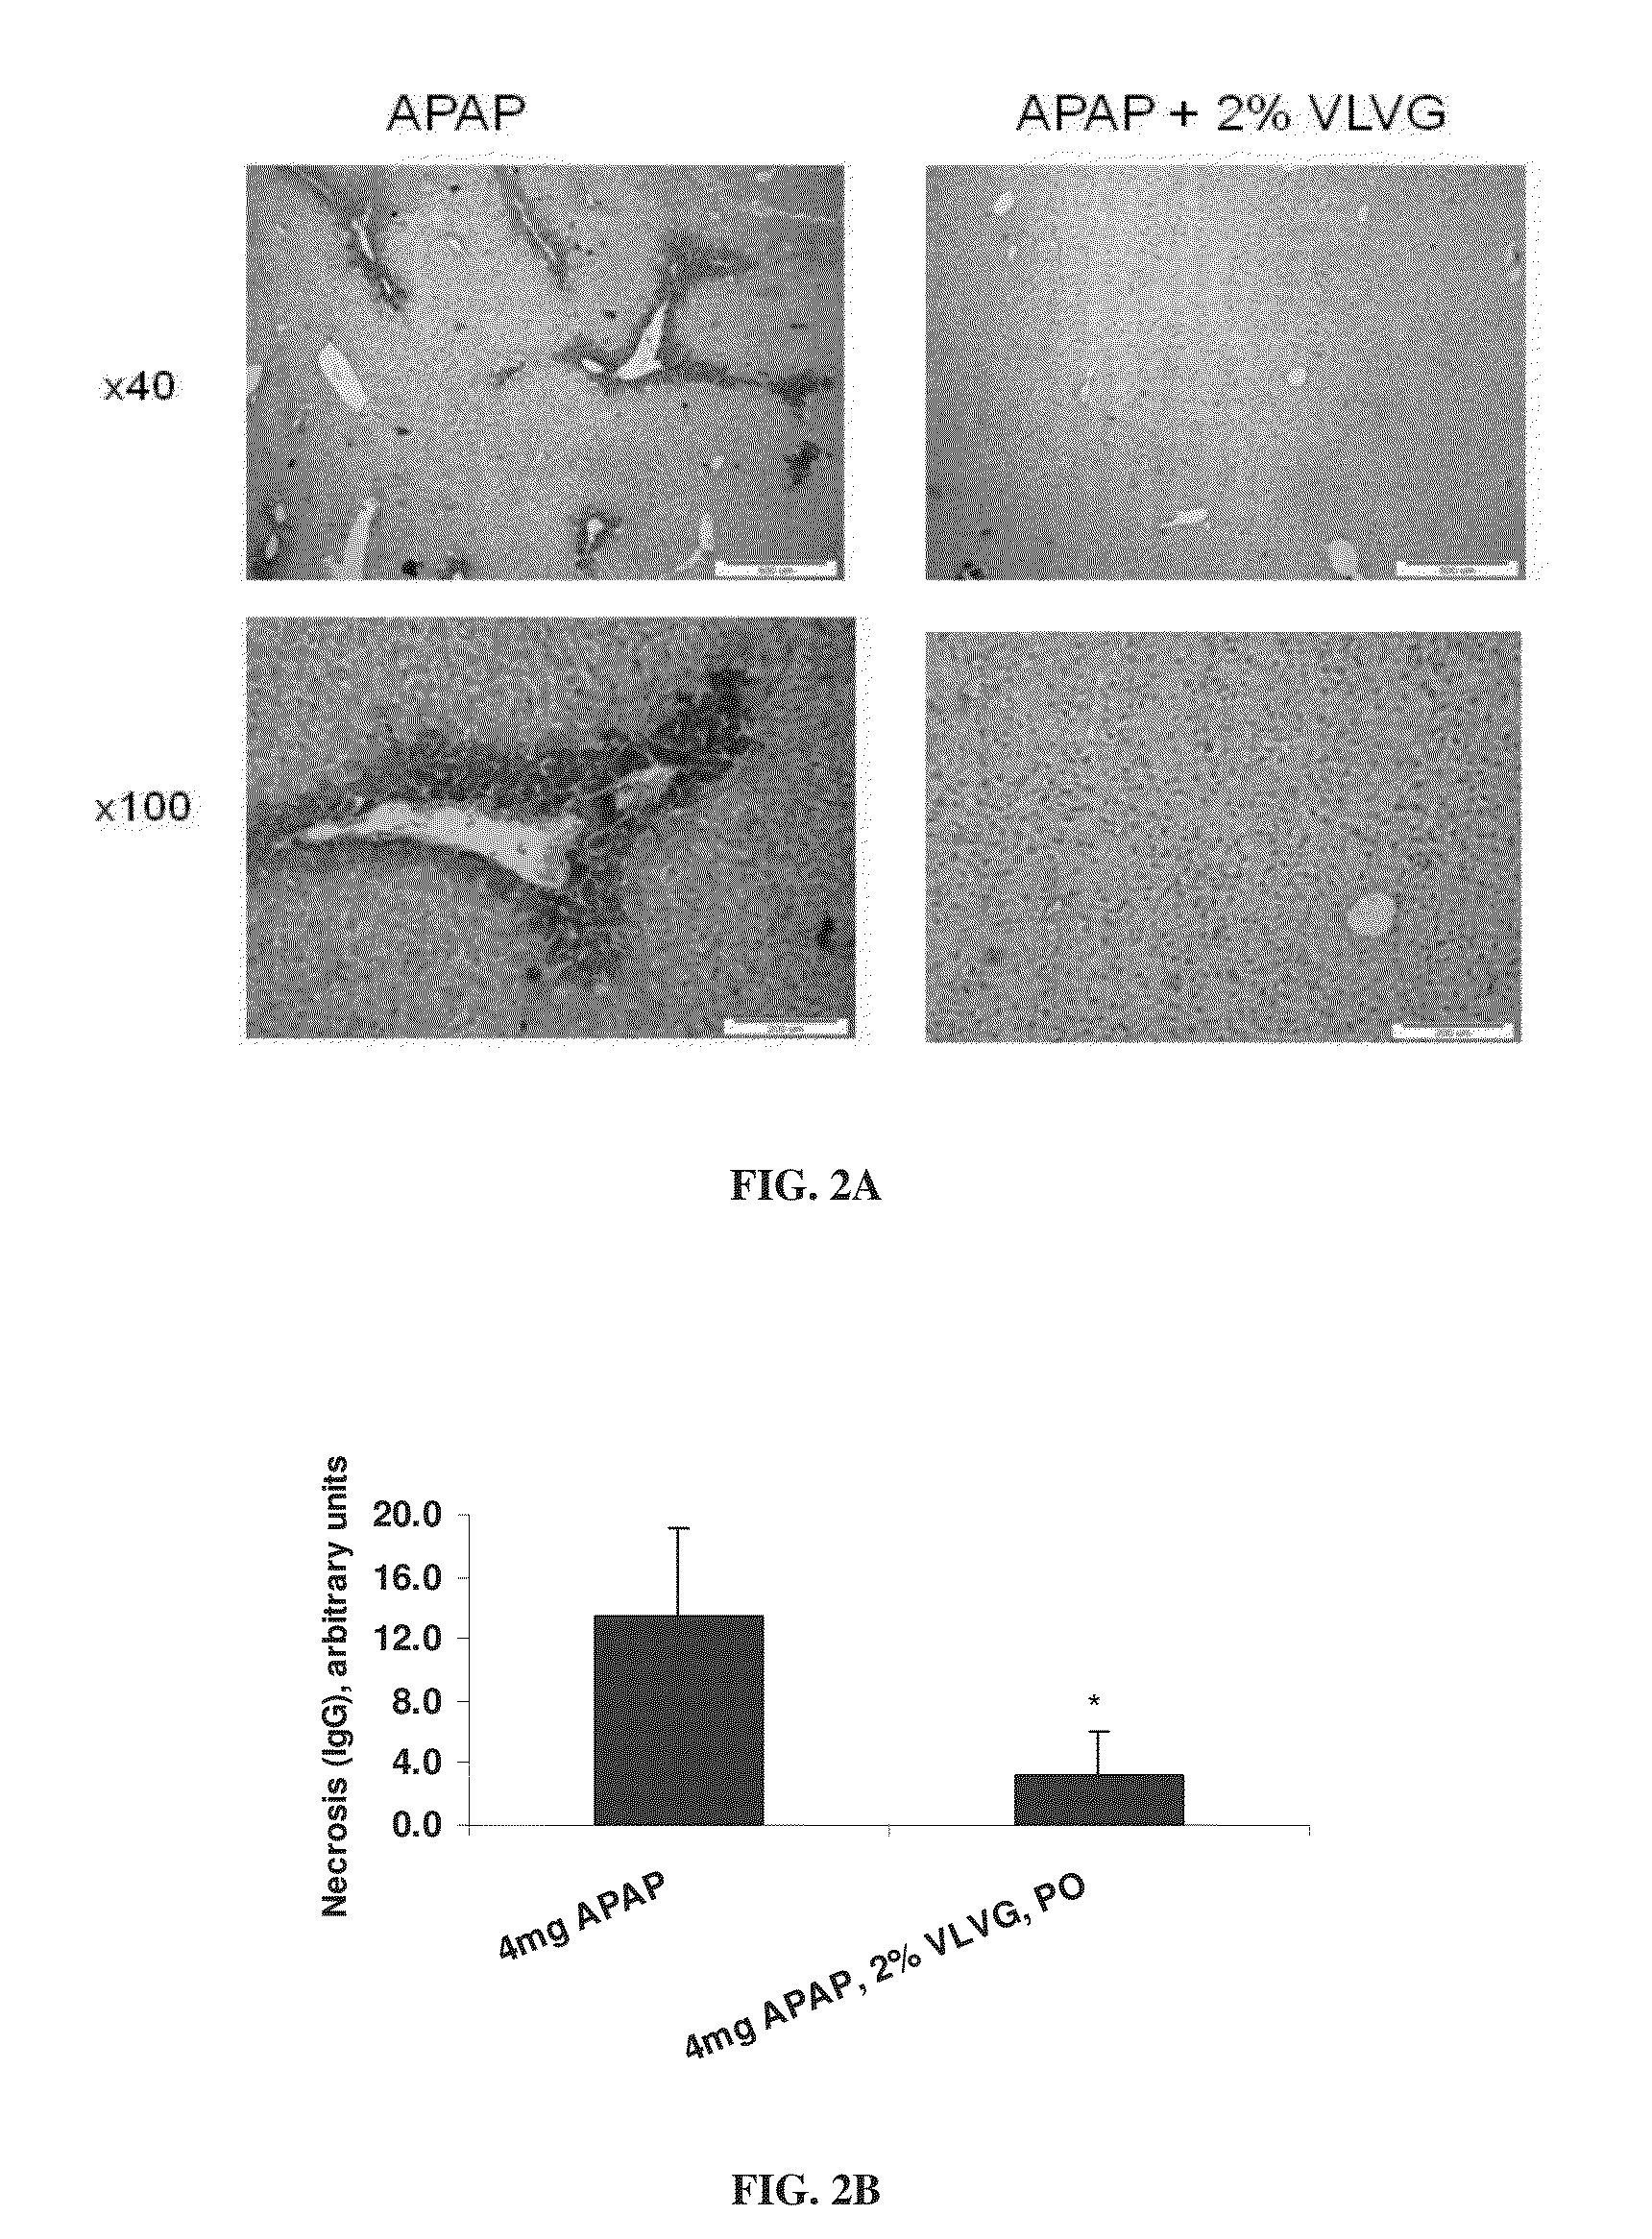 Use of alginate compositions in preventing or reducing liver damage caused by a hepatotoxic agent